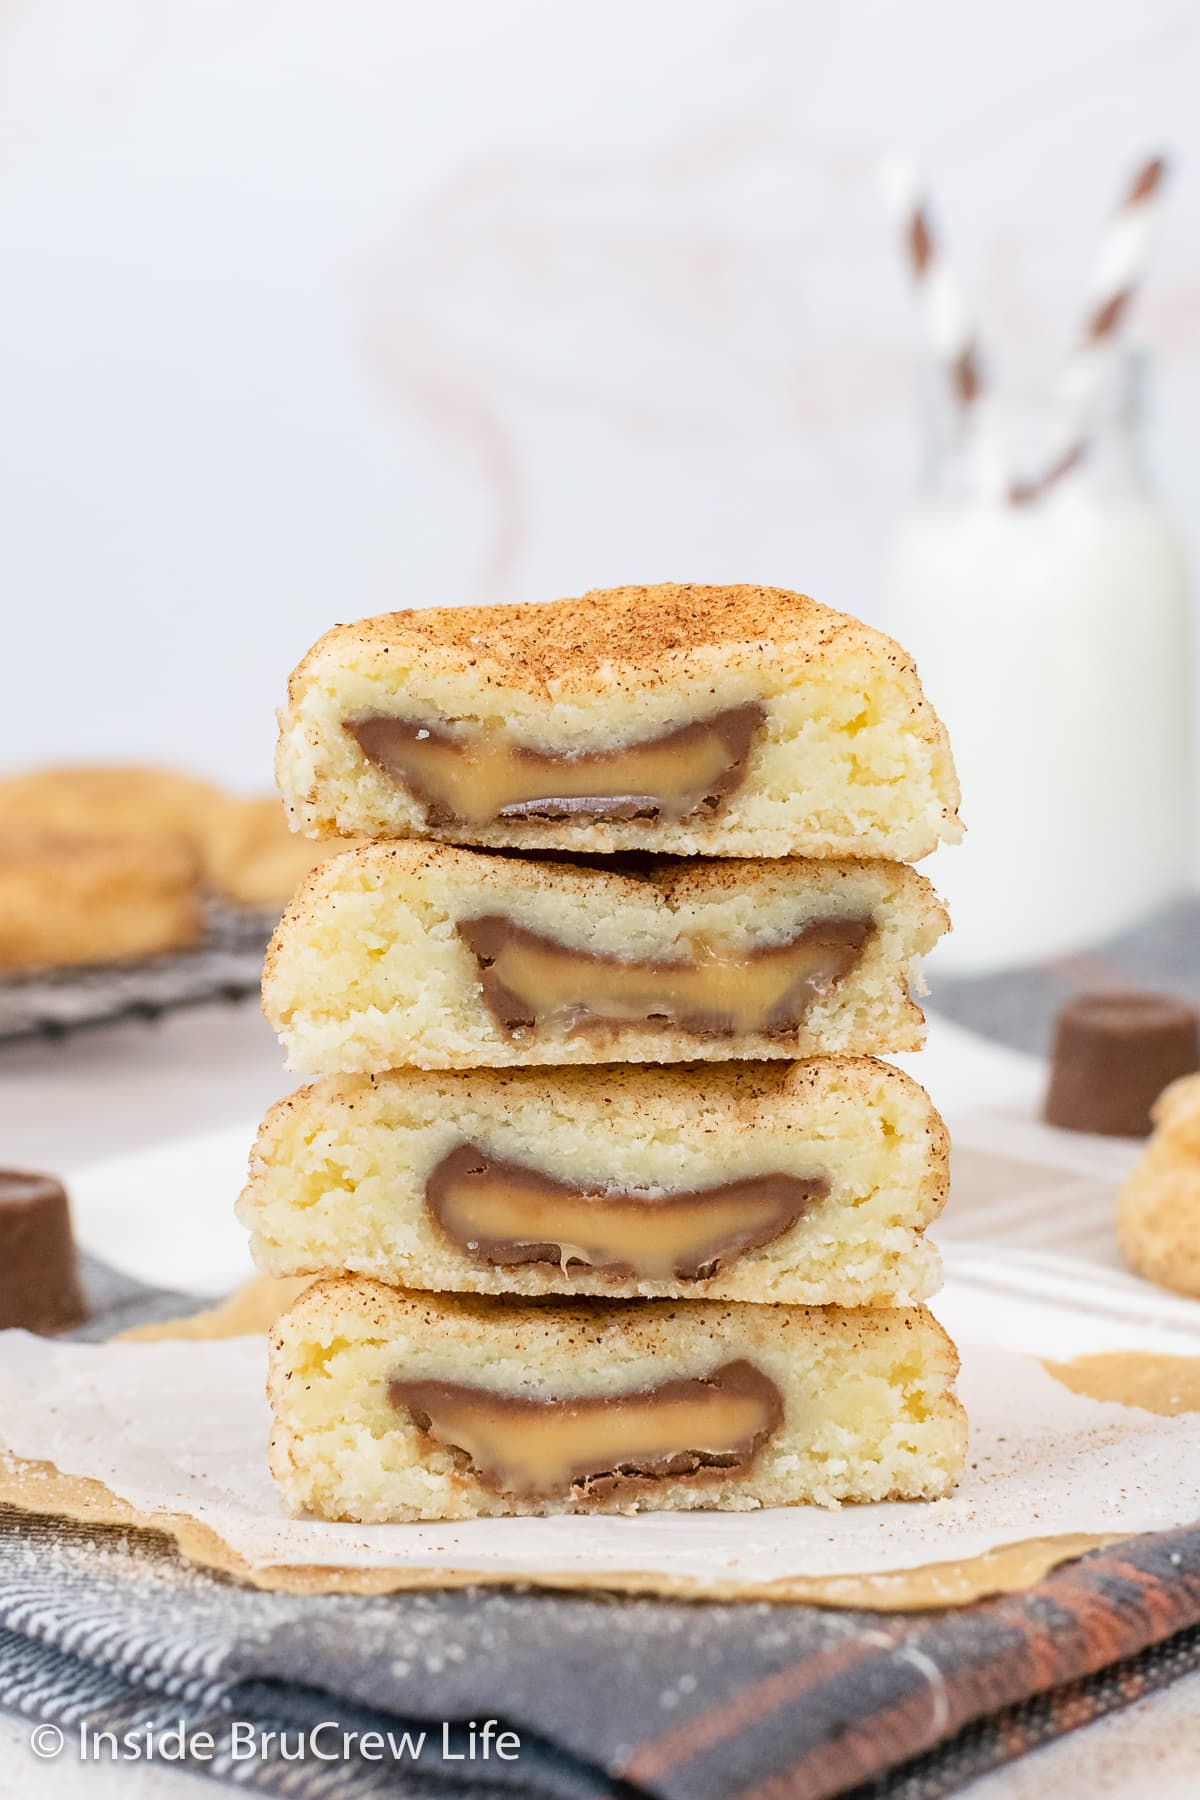 Four cookies cut in half and stacked showing a gooey caramel center.